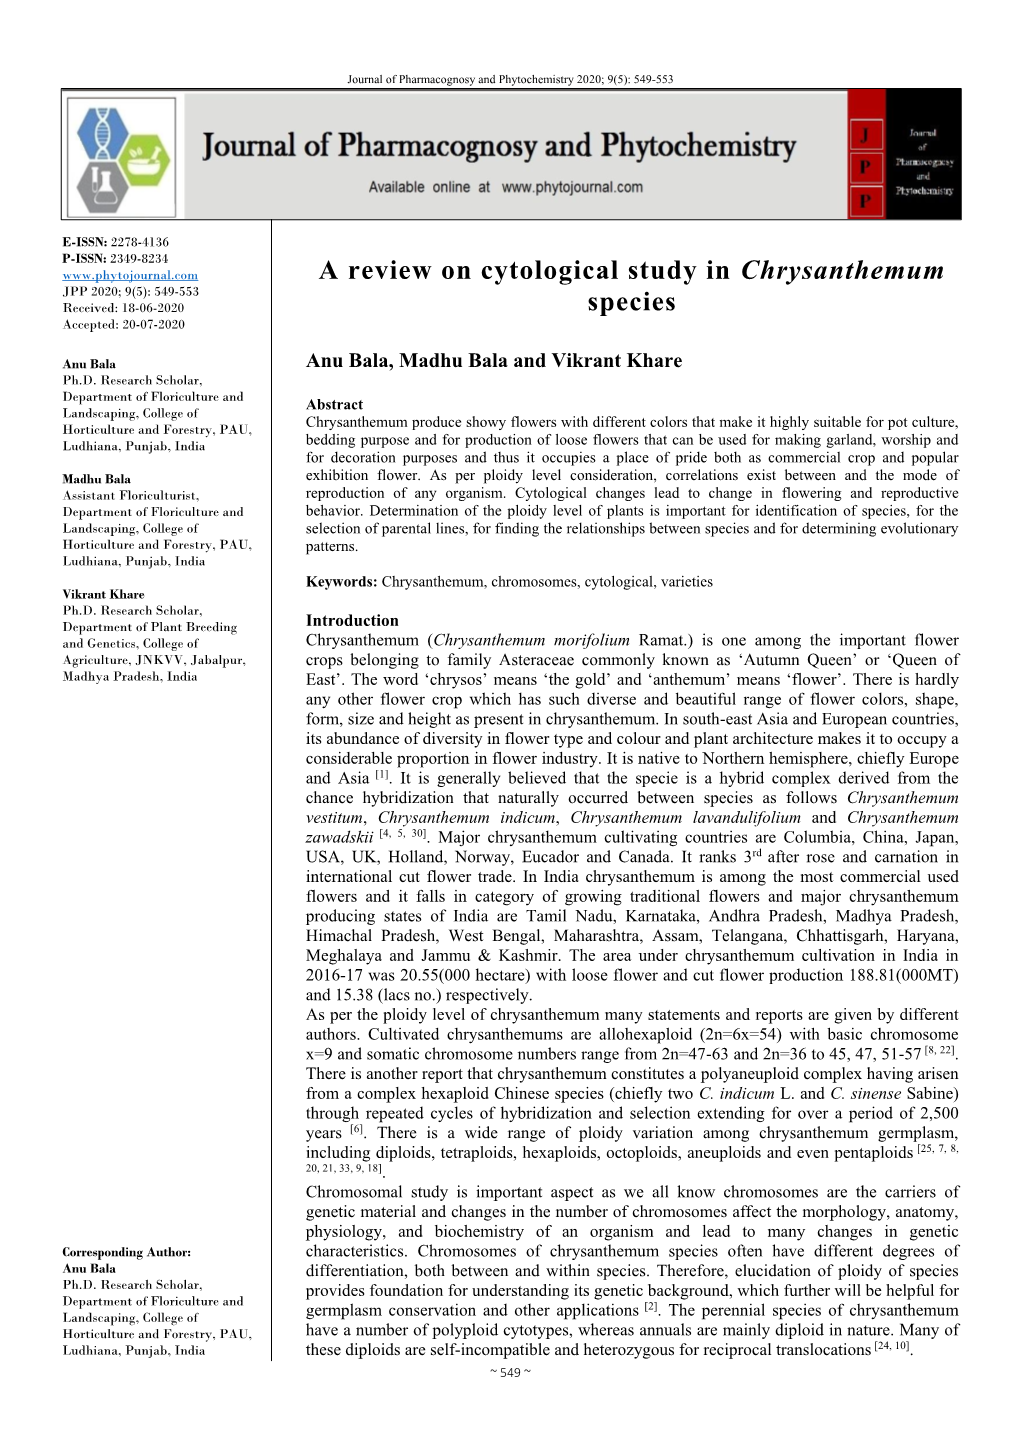 A Review on Cytological Study in Chrysanthemum Species